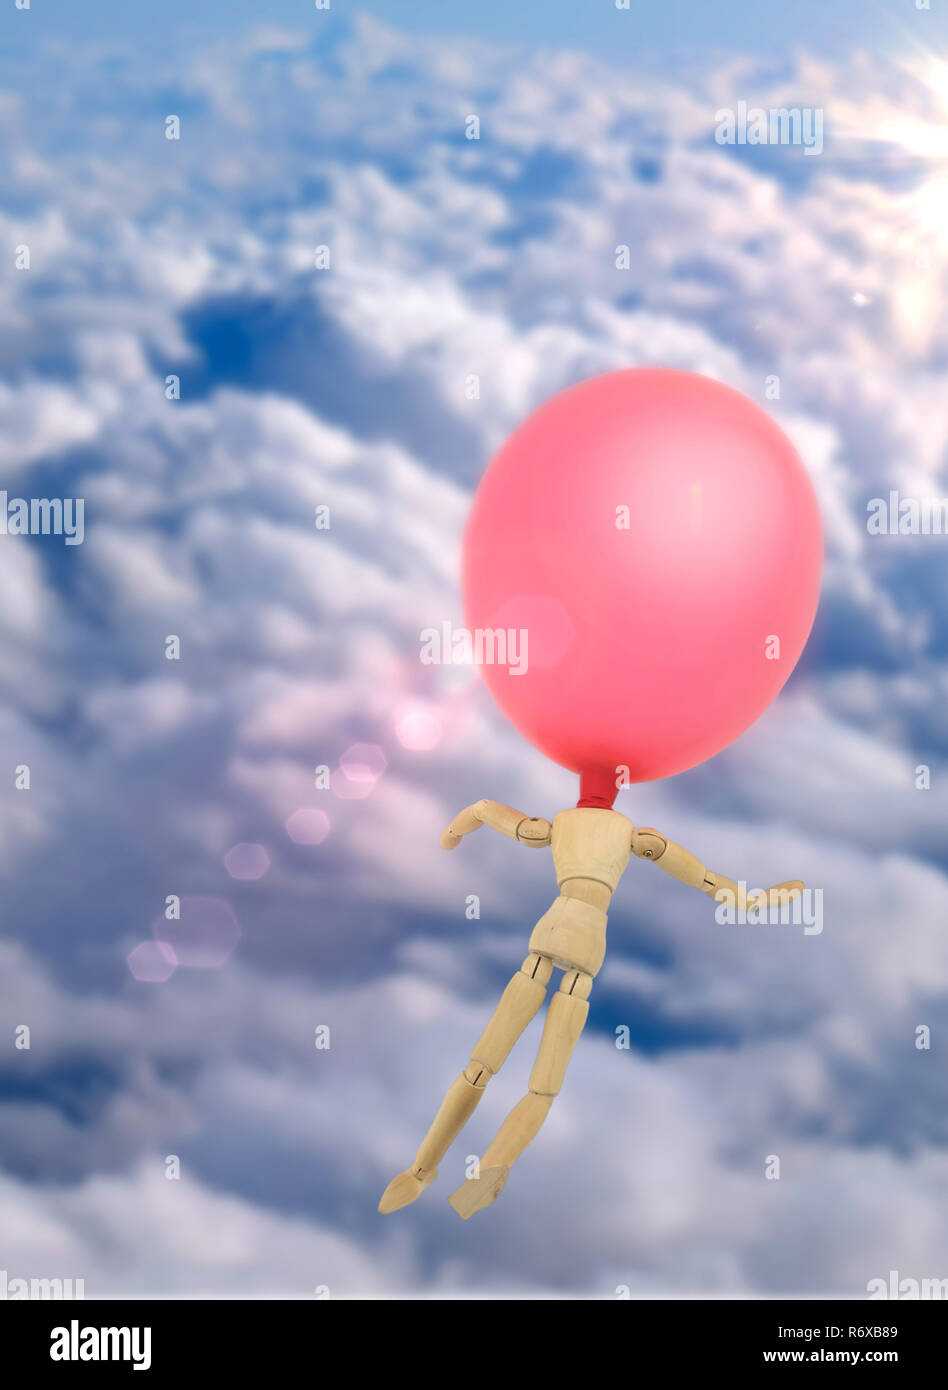 Doll made of wood with balloon in the head flies through the sky, conceptual image Stock Photo